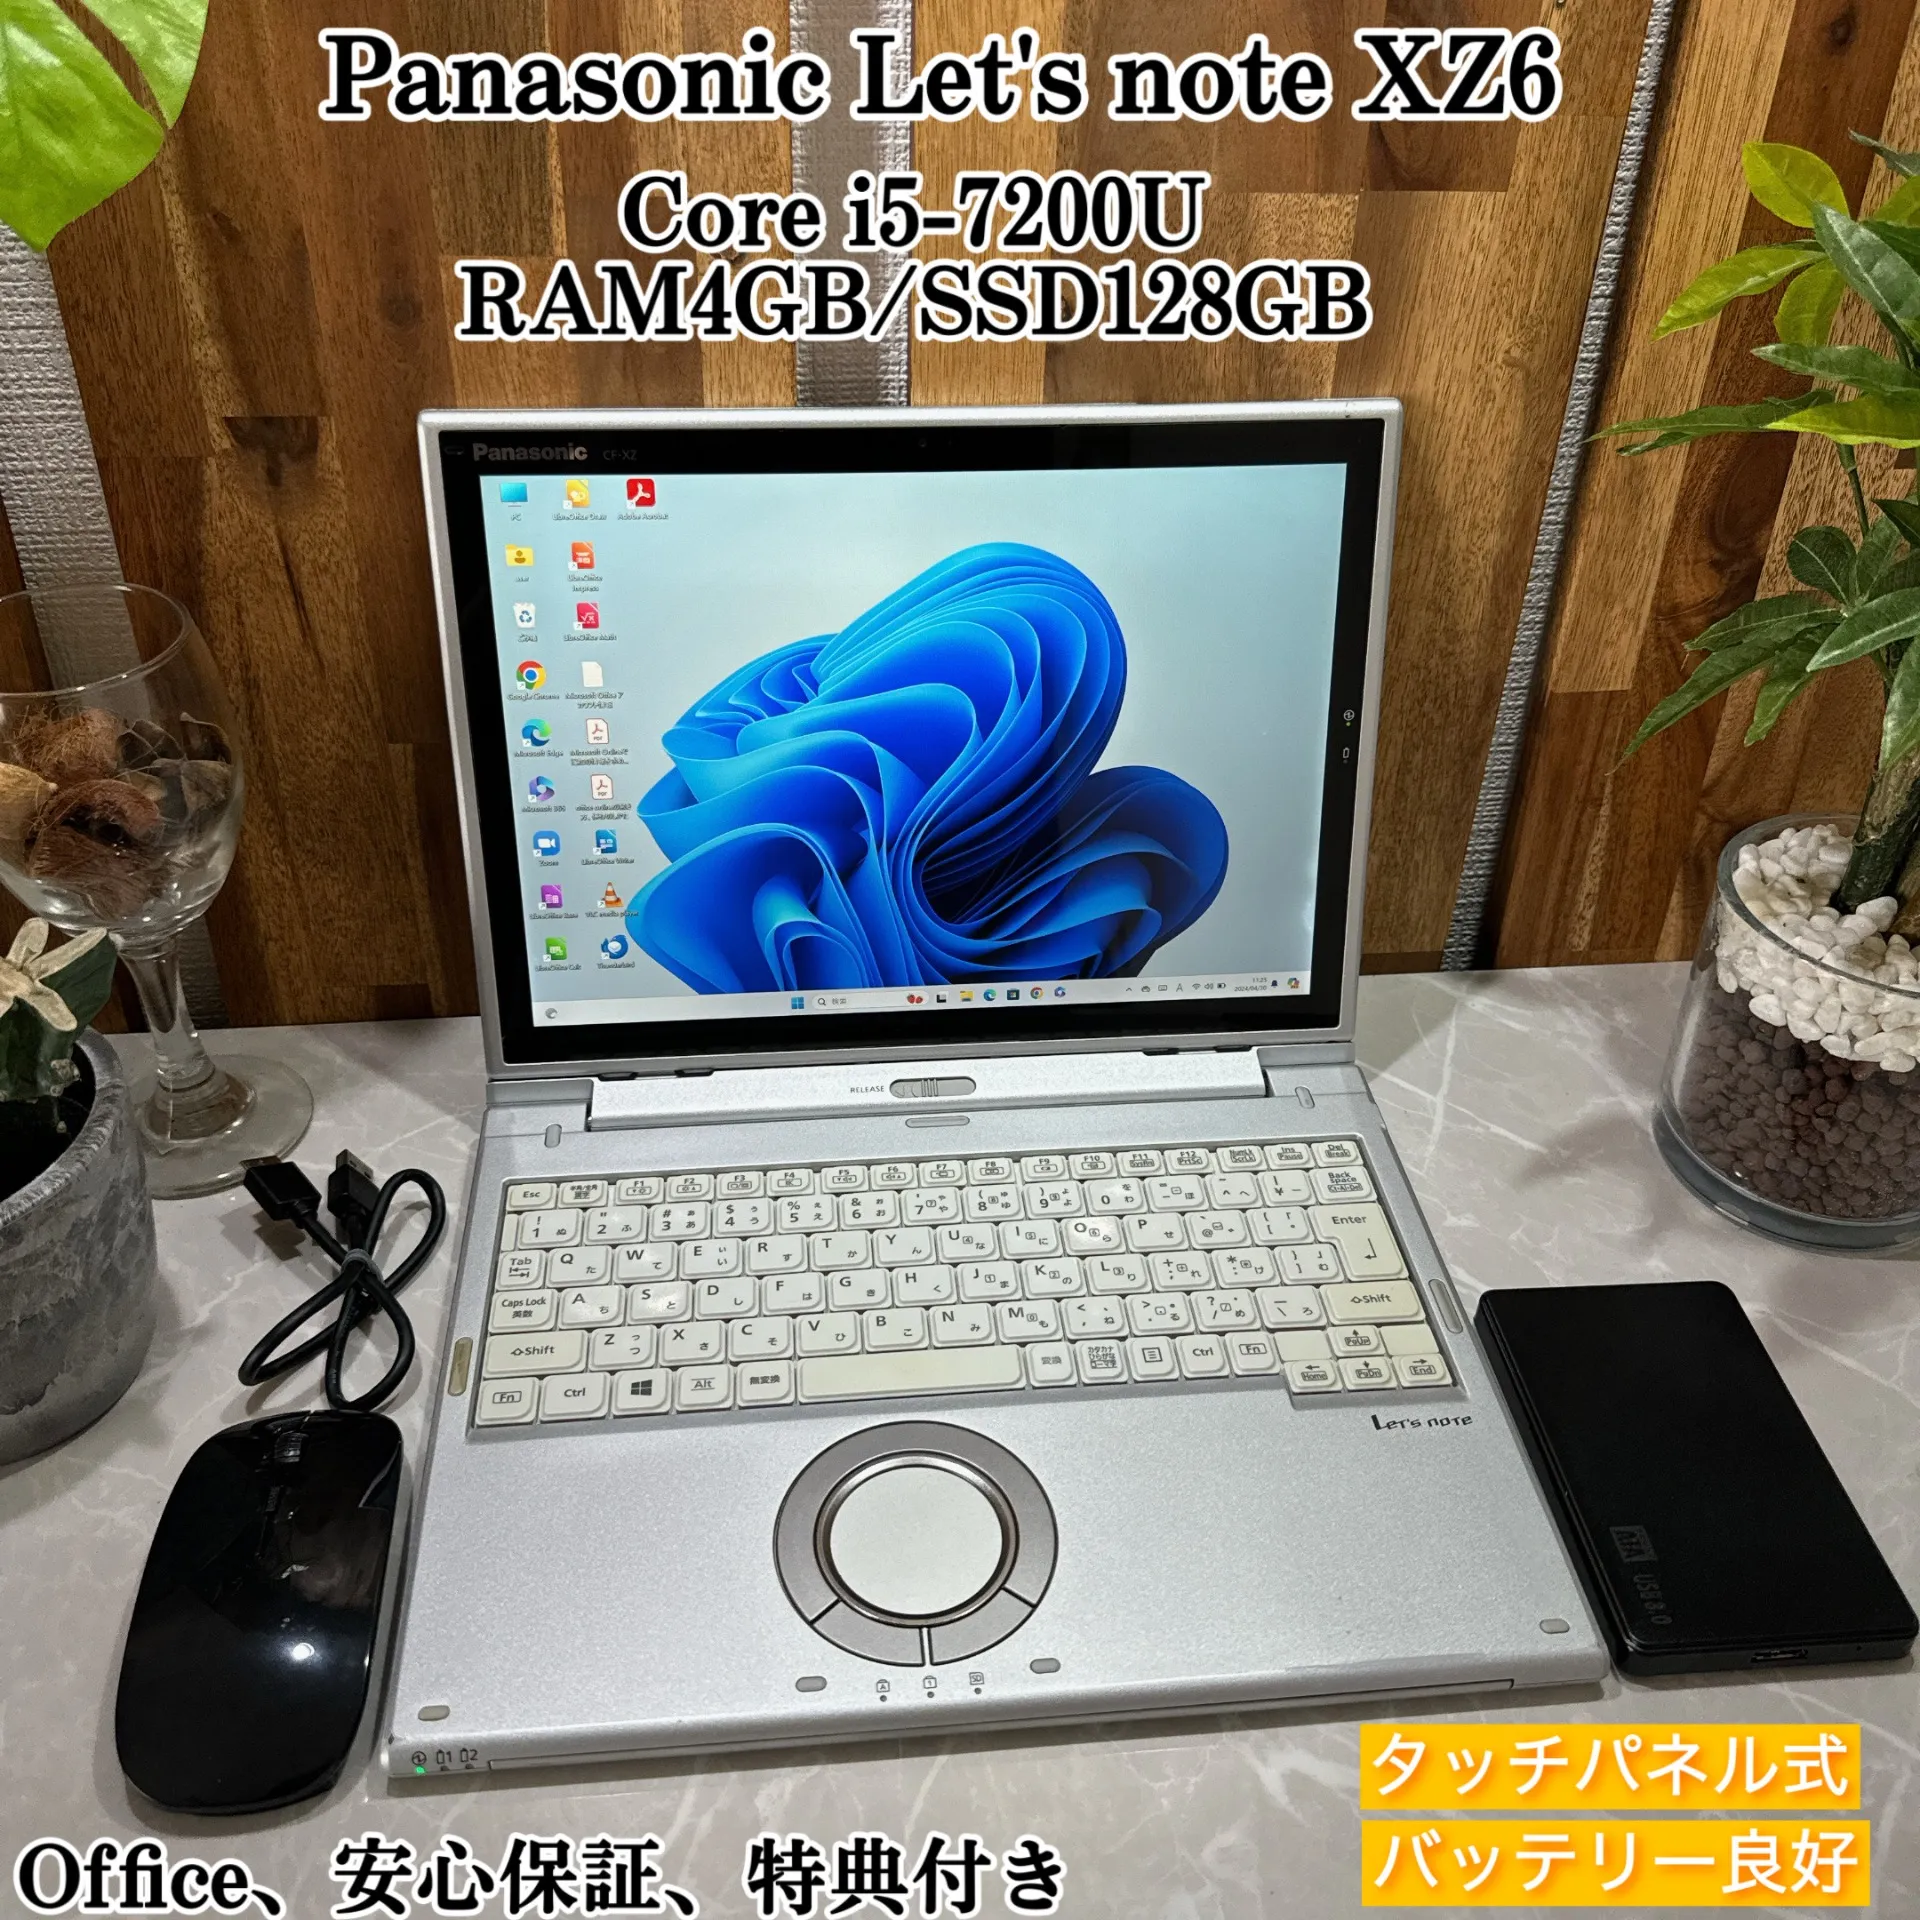 Let's note XZ6☘️Core i5第7世代☘️メモリ4G☘️SSD128G【VKHRC2404007】